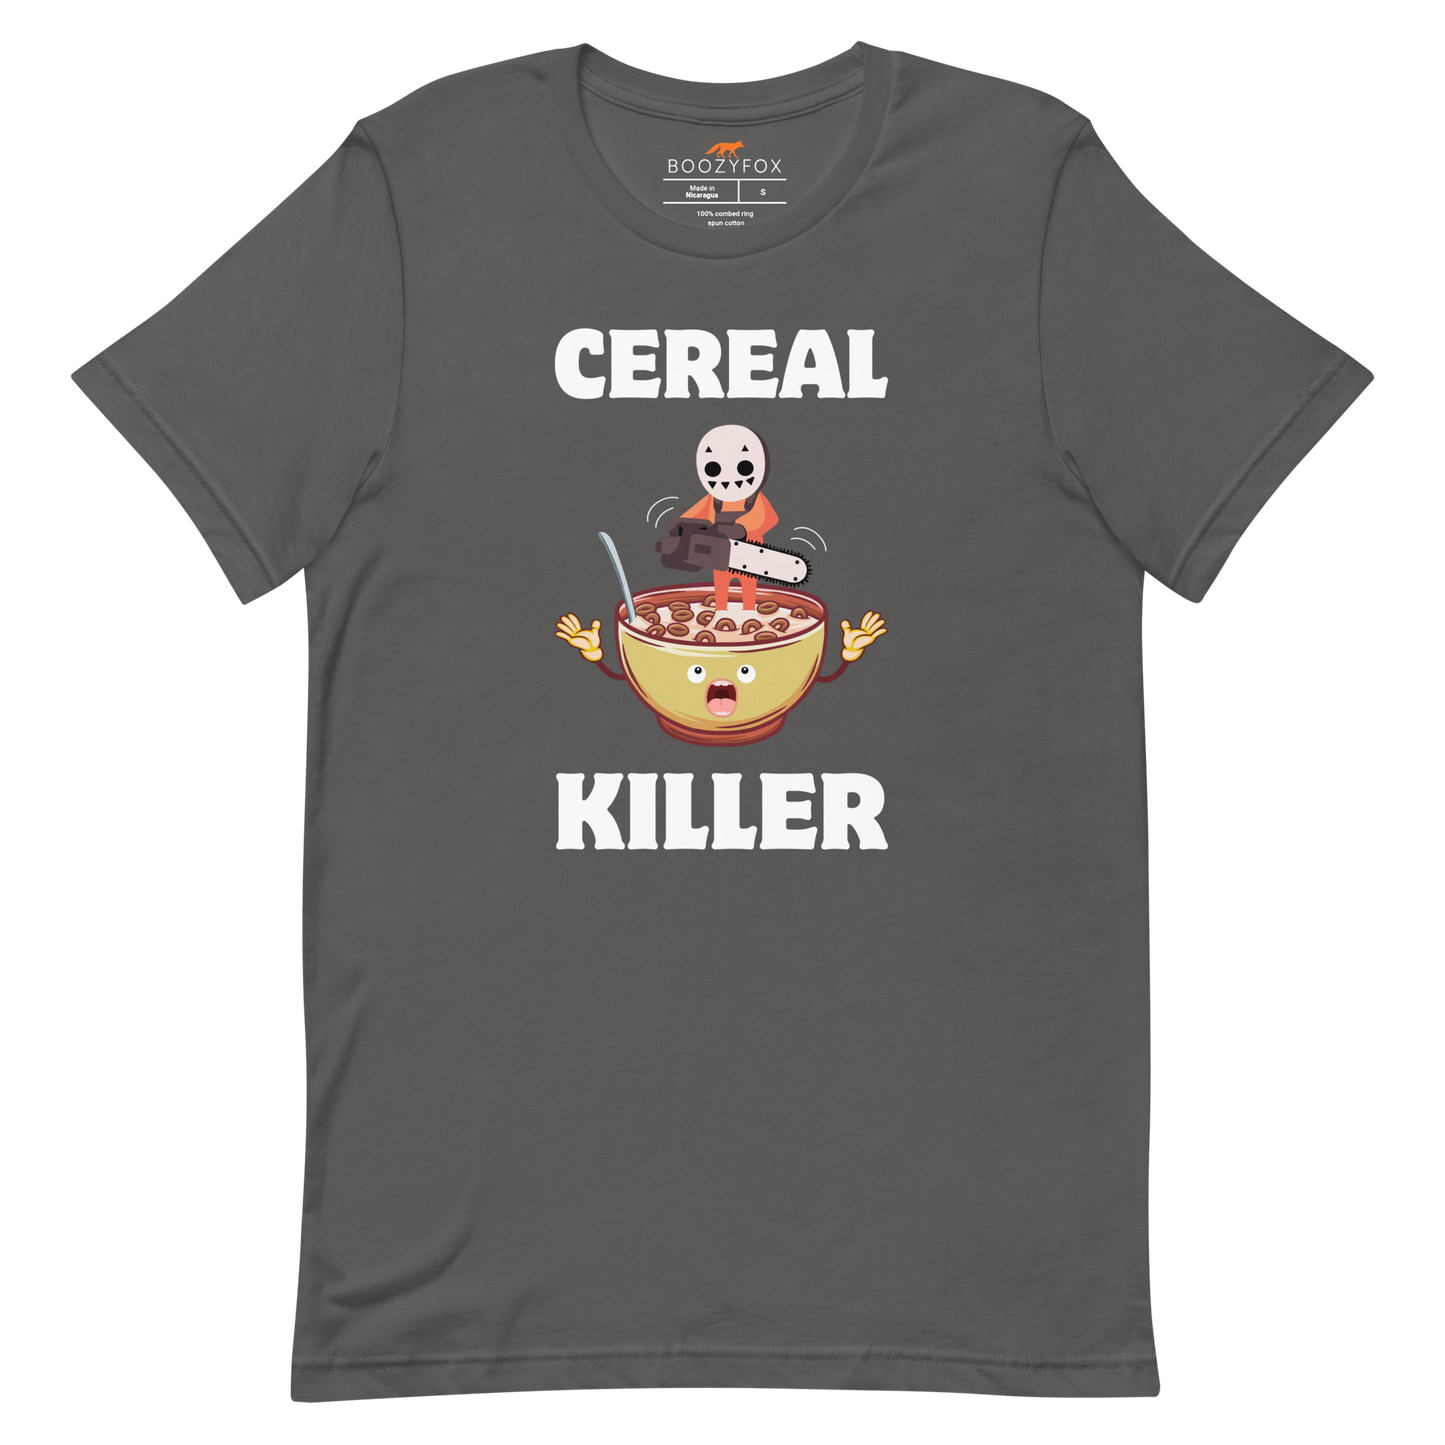 Asphalt Grey Premium Cereal Killer Tee featuring a Cereal Killer graphic on the chest - Funny Graphic Tees - Boozy Fox